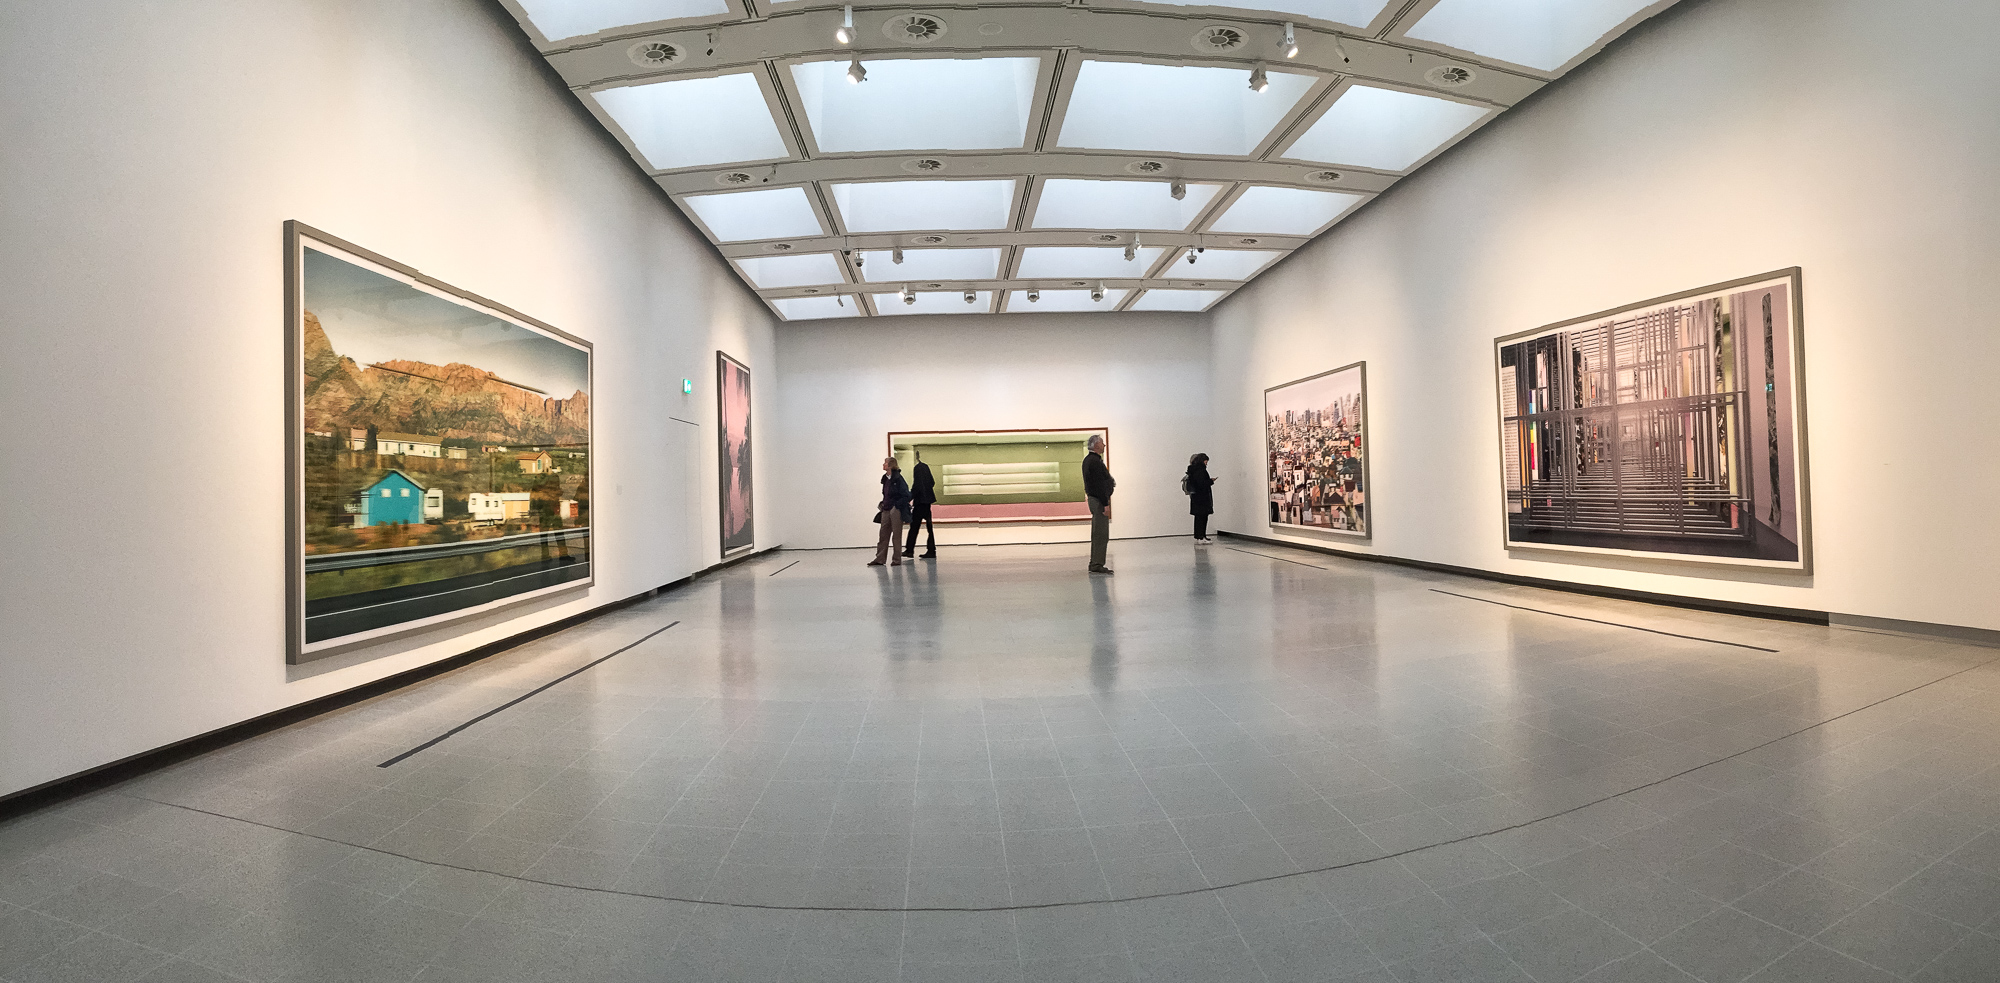 The upper galleries in the new Hayward Gallery, Southbank, London. Photography works by Andreas Gursky.